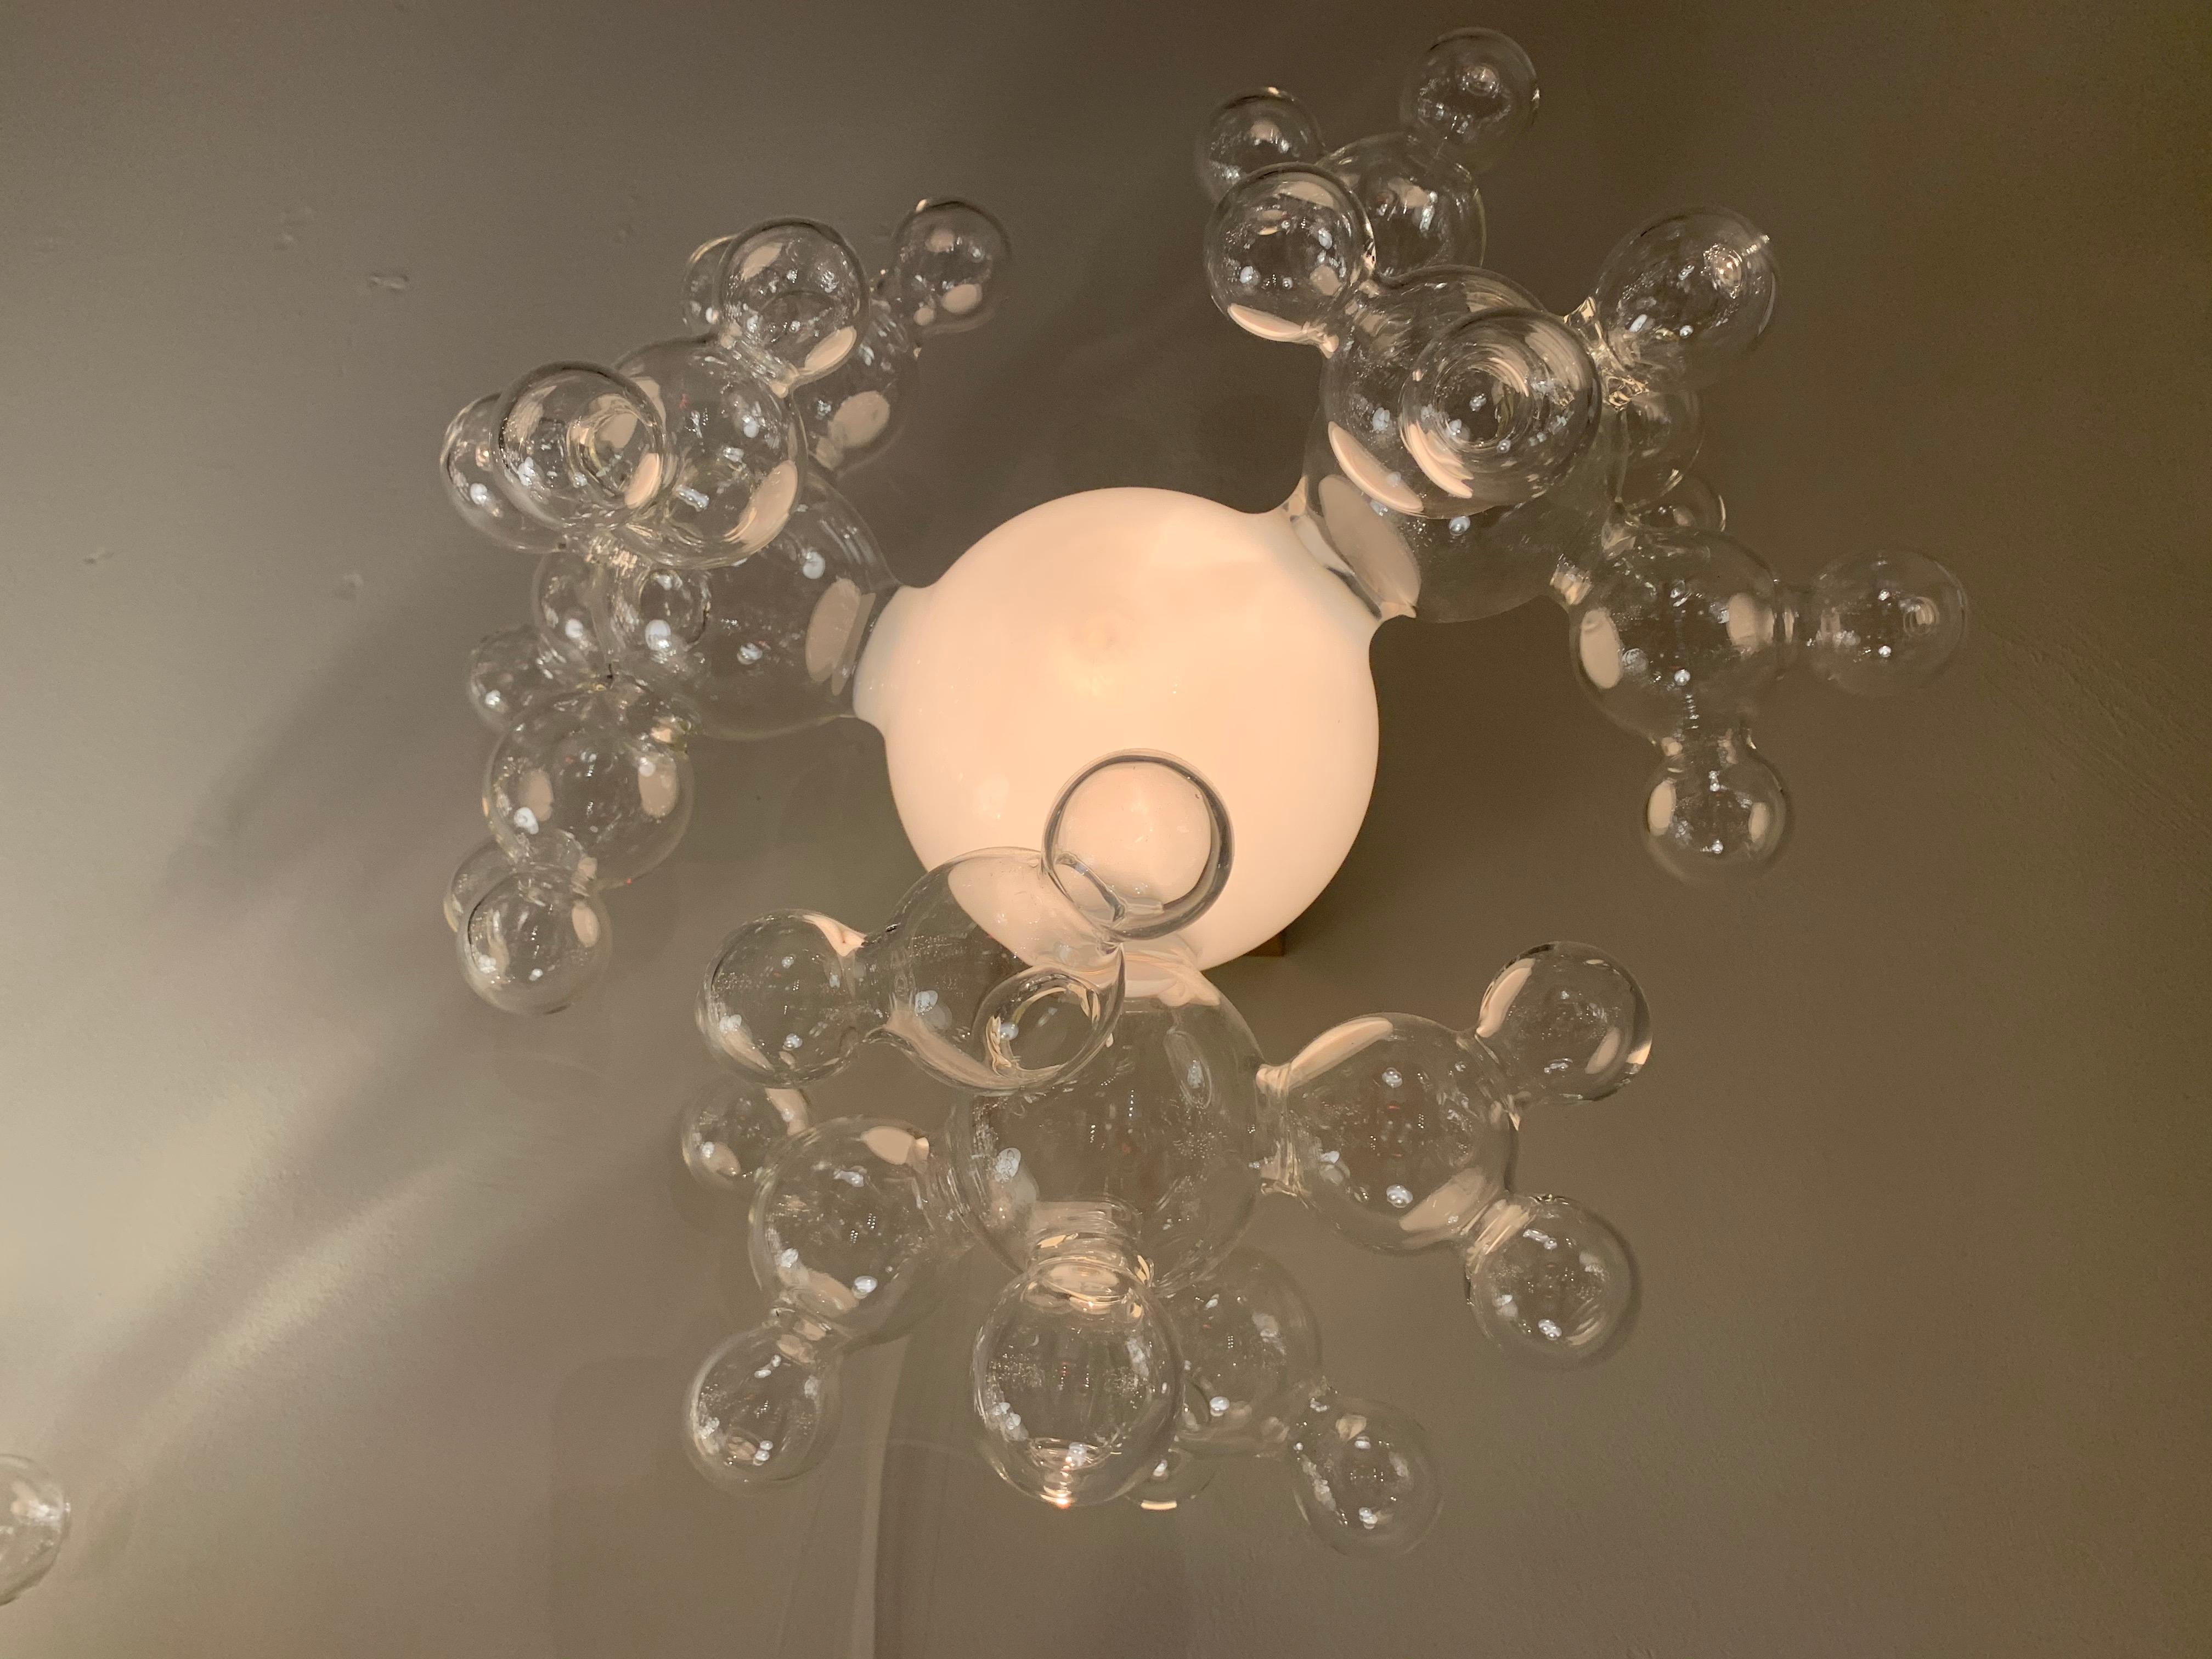 Matched Pair of Glass “Bubble” Sconces by Simone Crestani, Italy, 2018 In New Condition For Sale In New York, NY